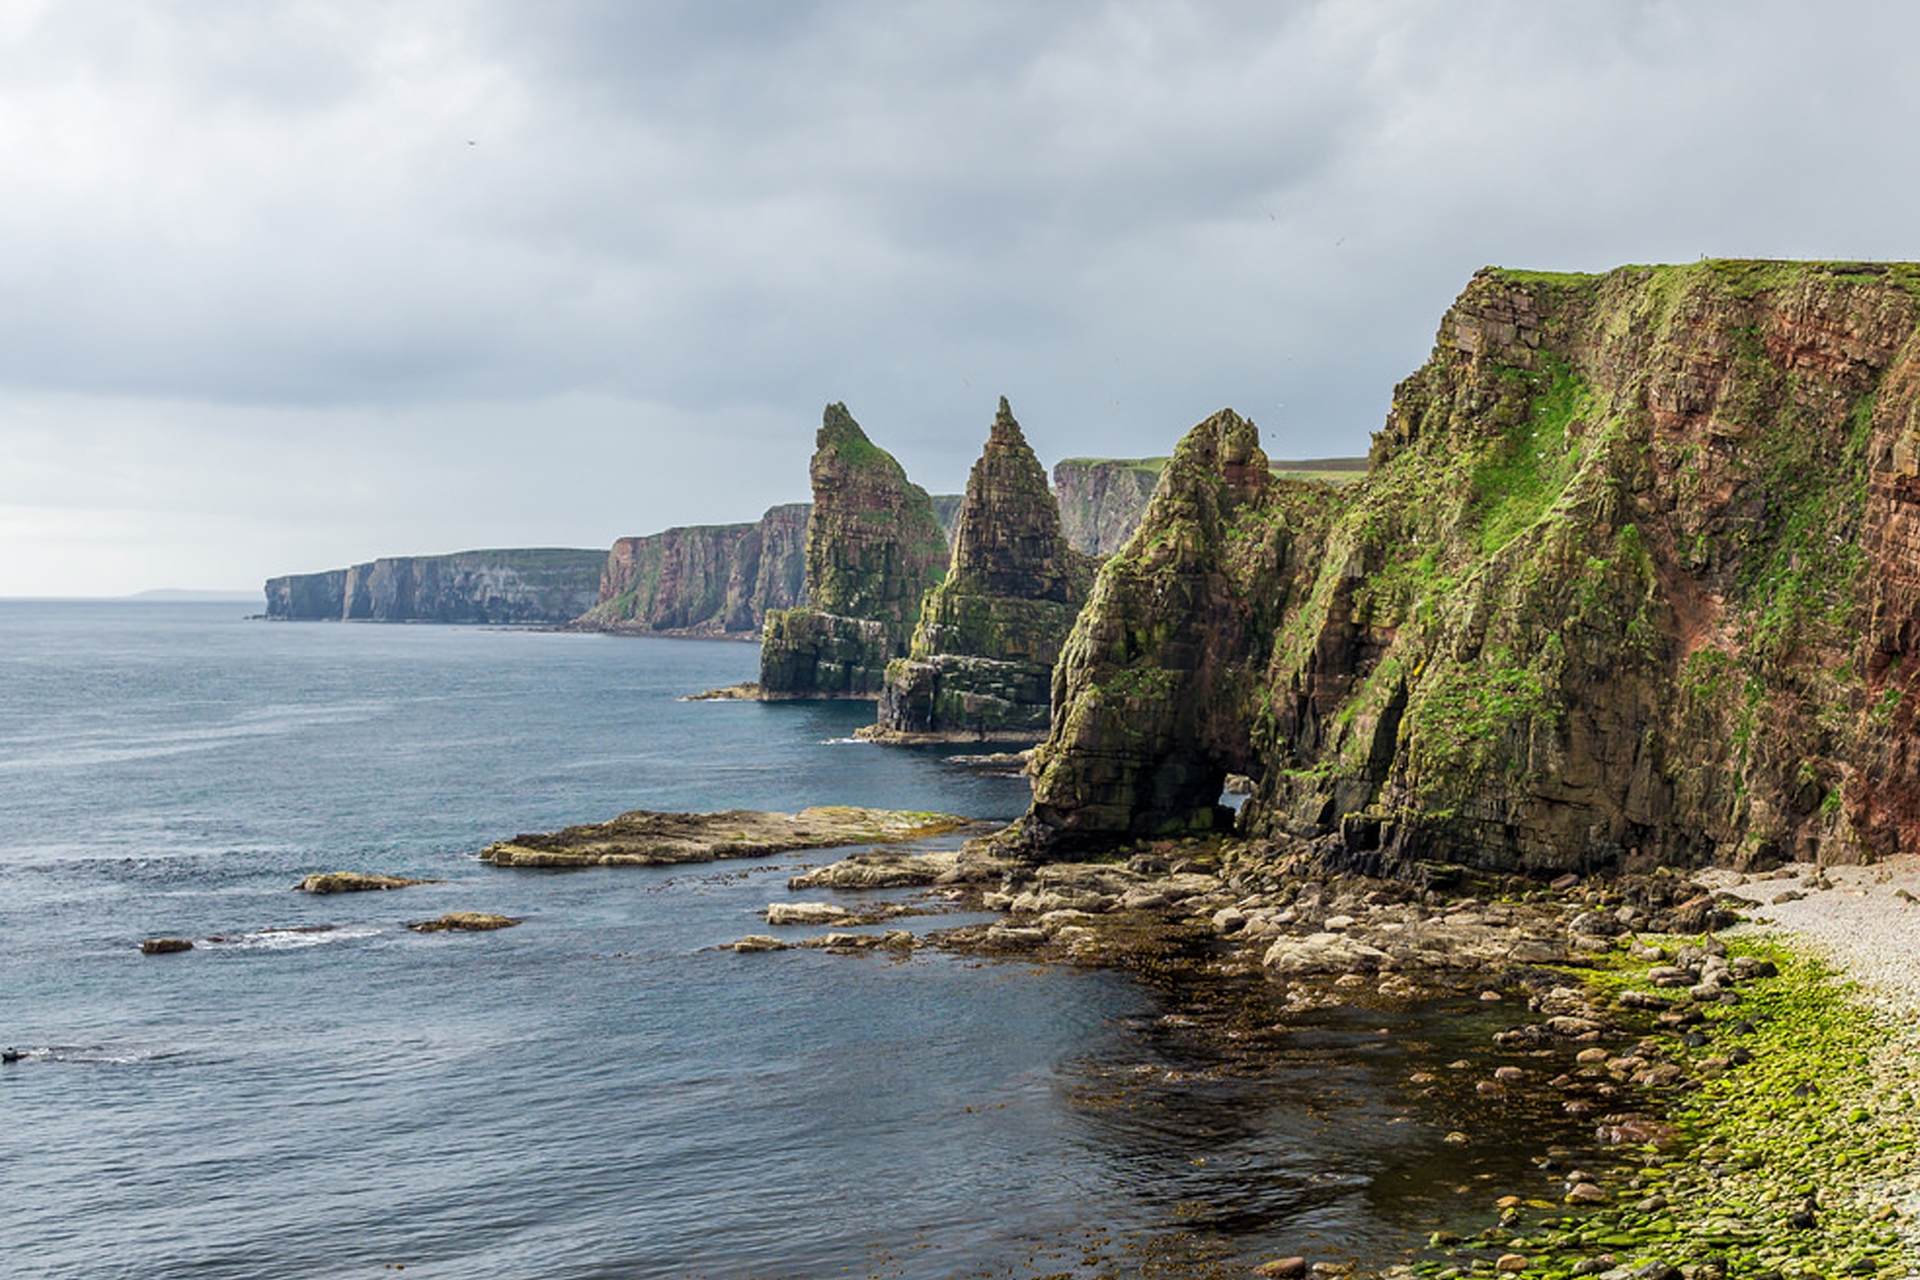 1DUNCANSBY HEAD